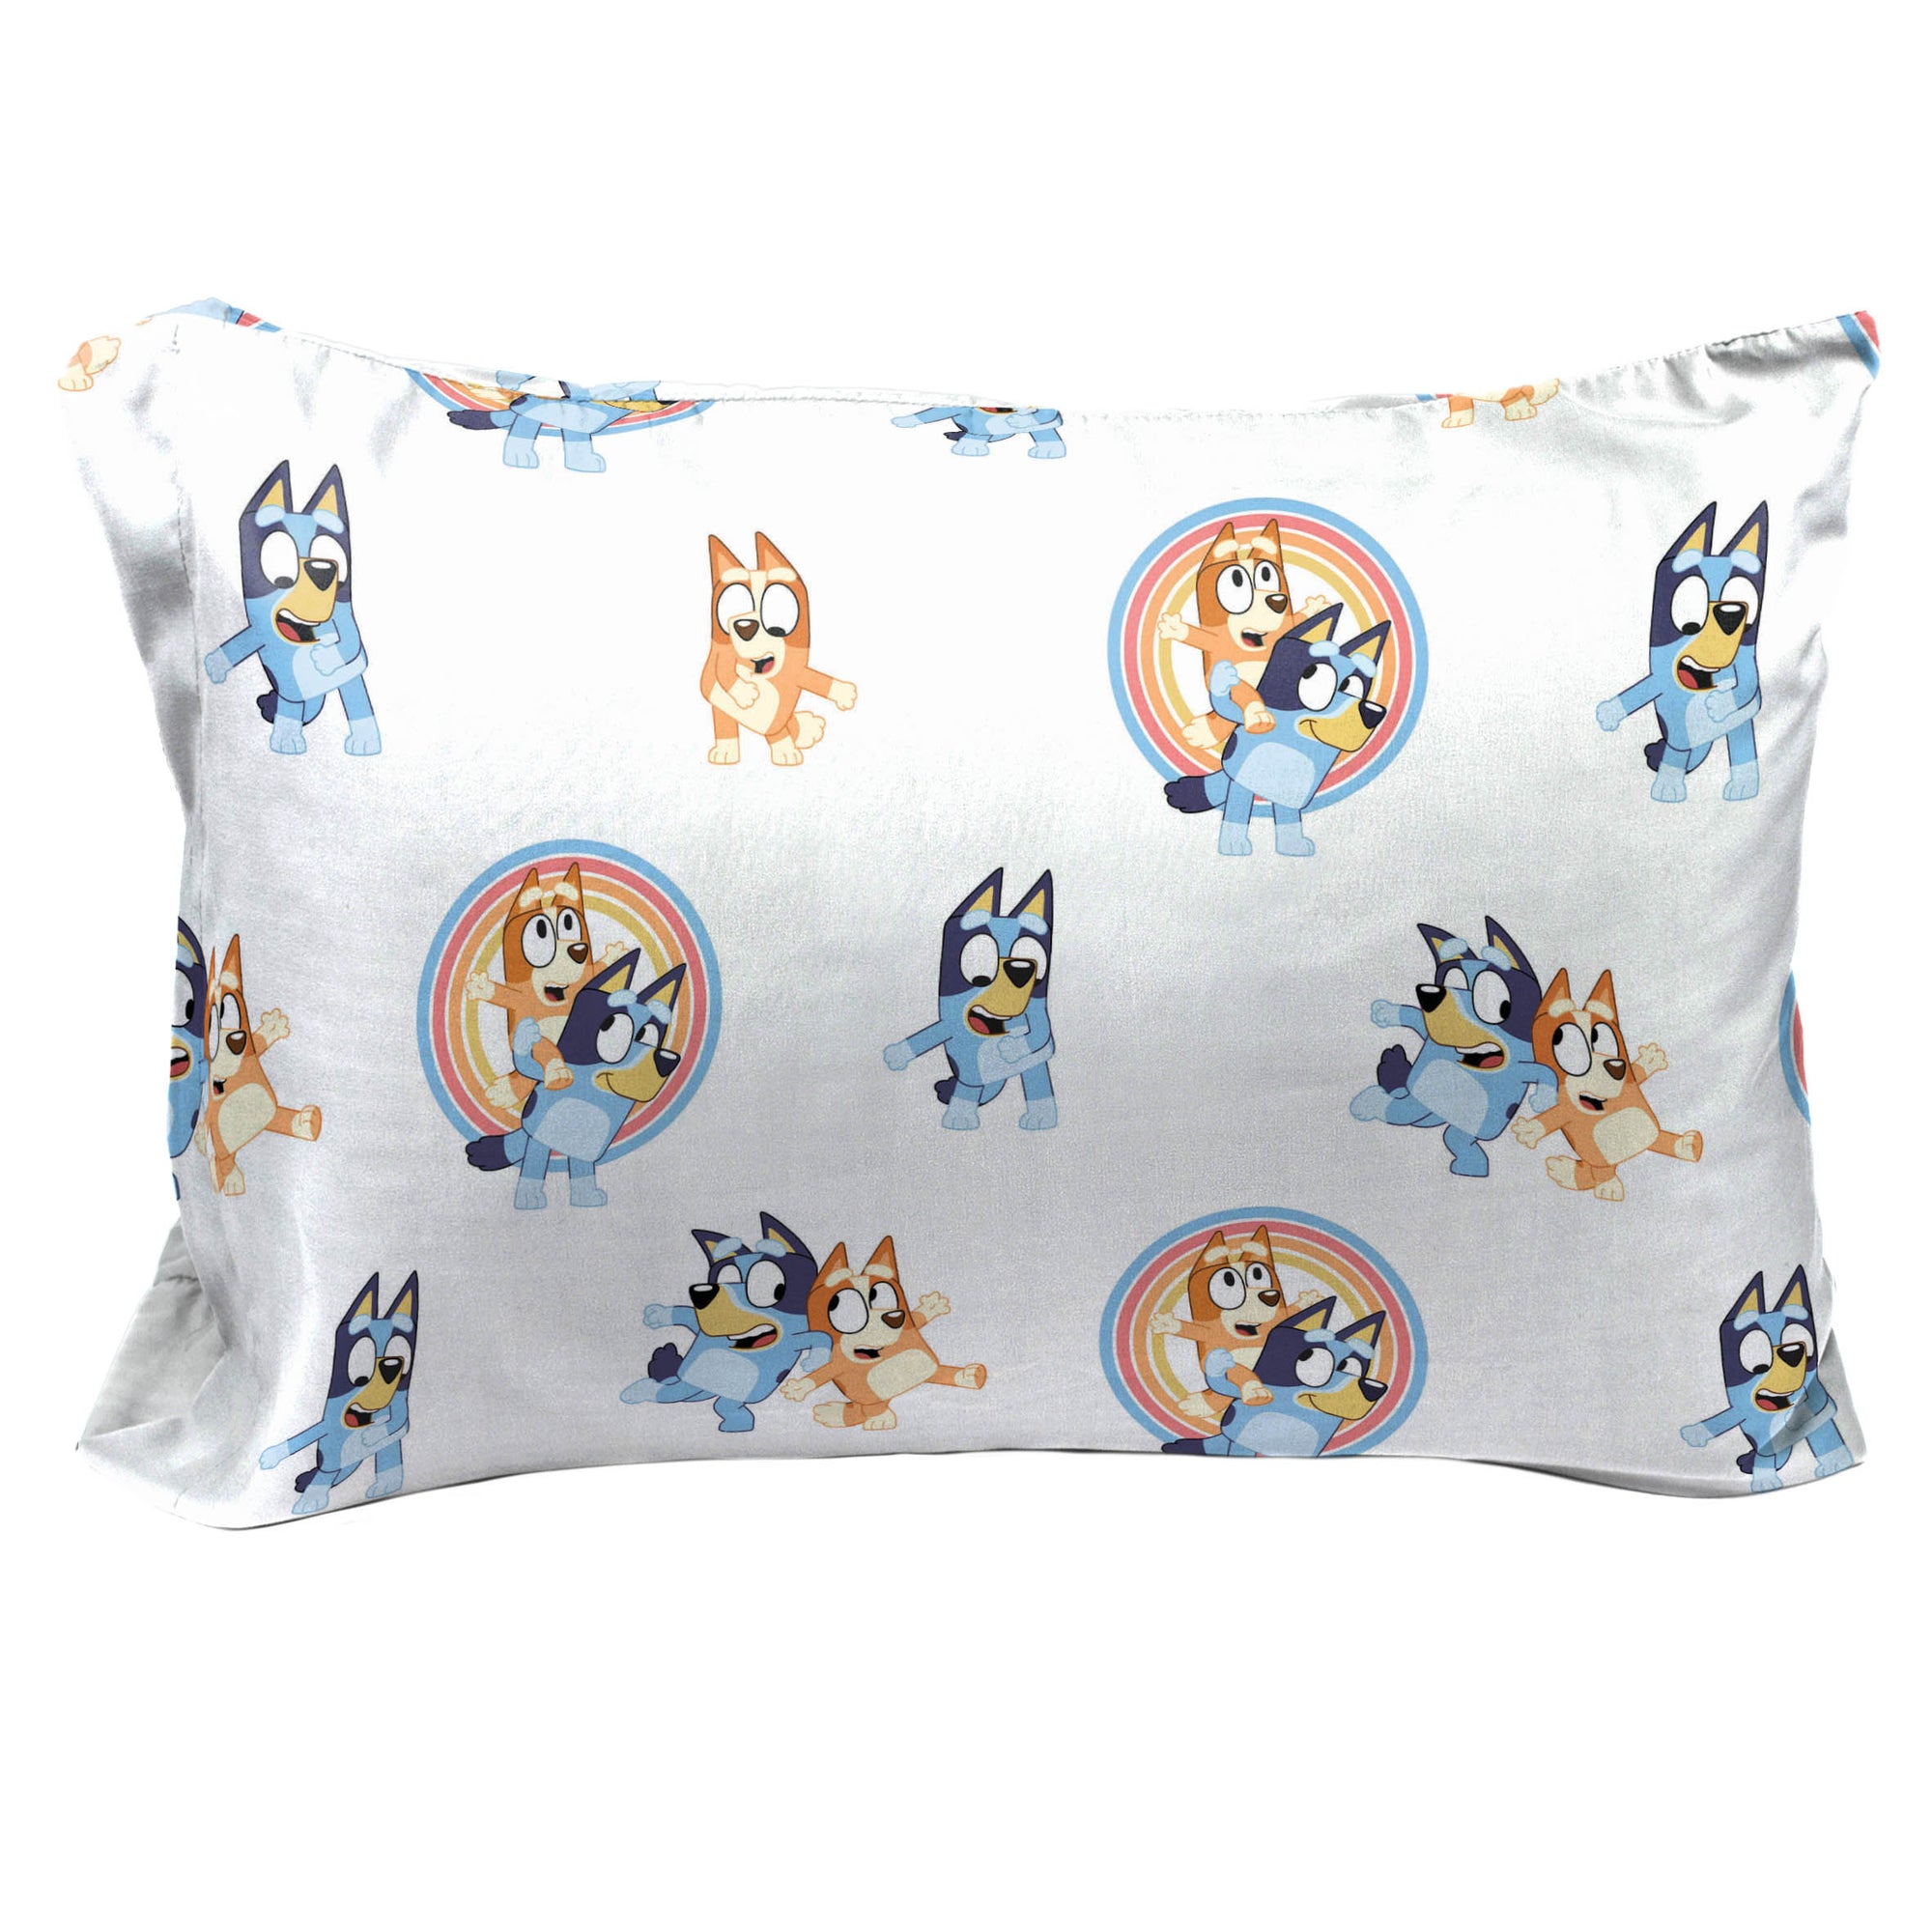 Saturday Park Bluey Rainbow in the Clouds 100% Organic 2 Pack Cotton Pillowcase